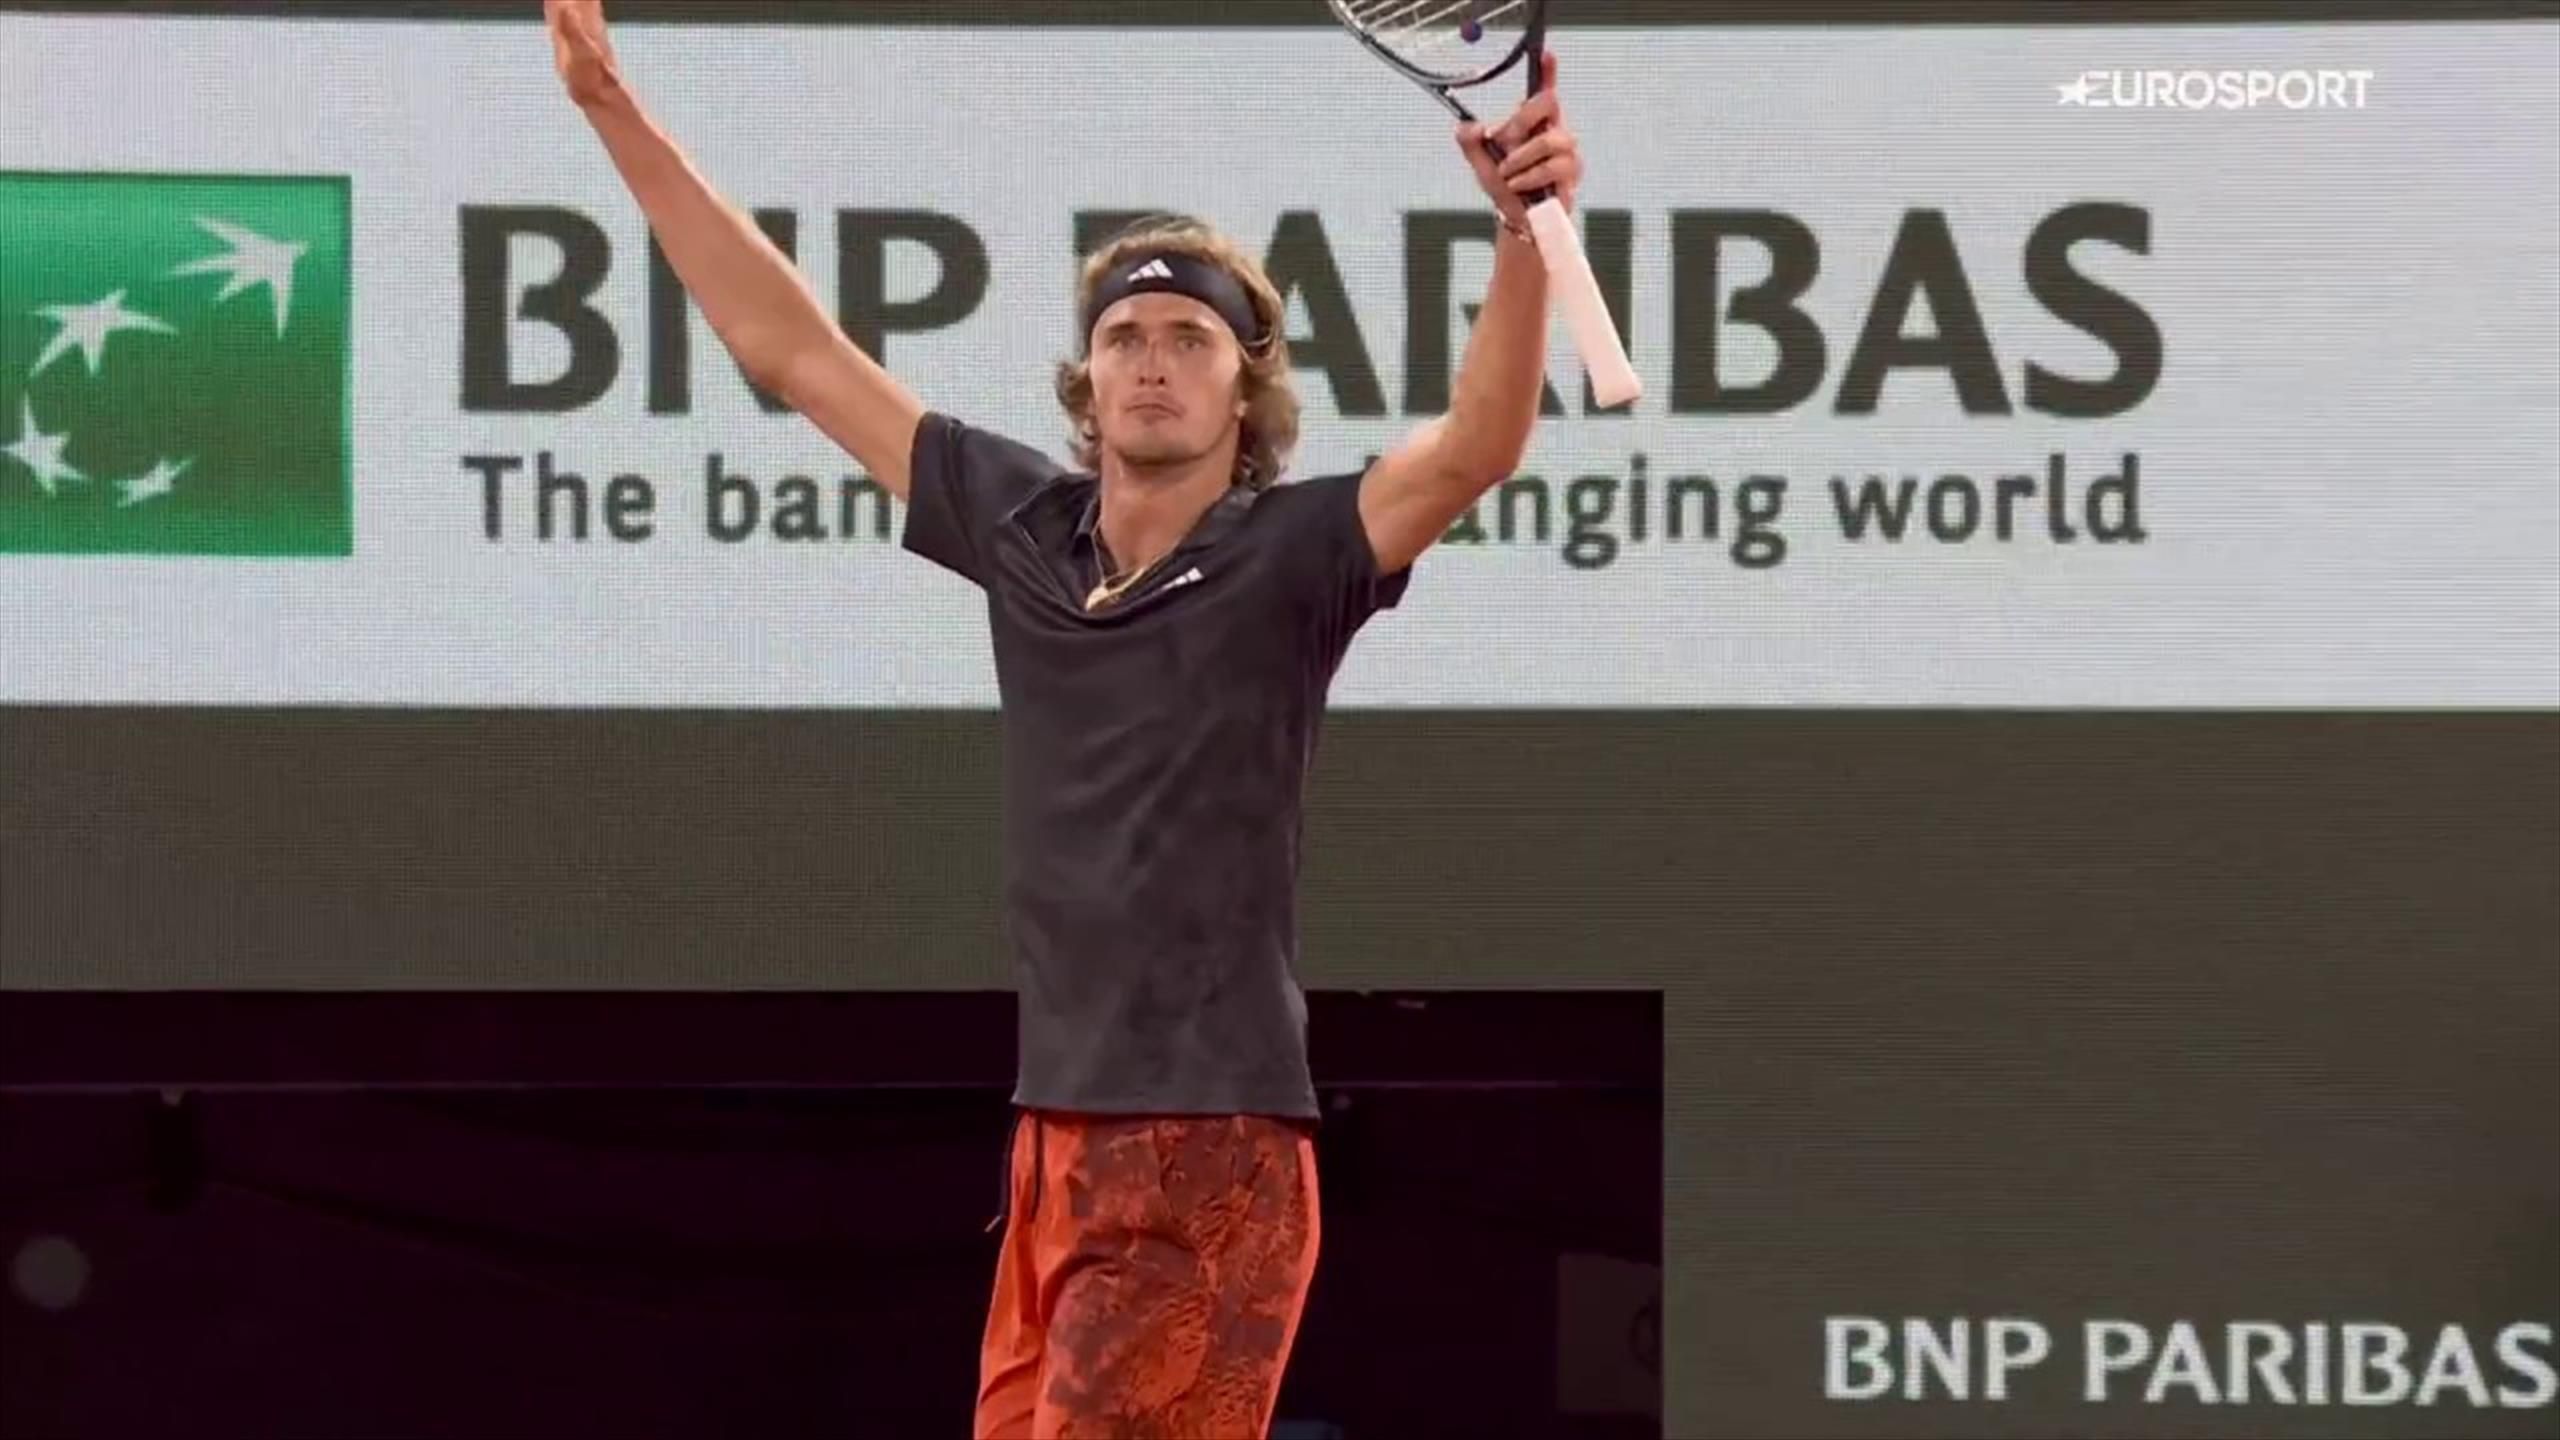 Hes made it! - Alexander Zverev fires shot of the tournament contender against Frances Tiafoe at French Open - Tennis video